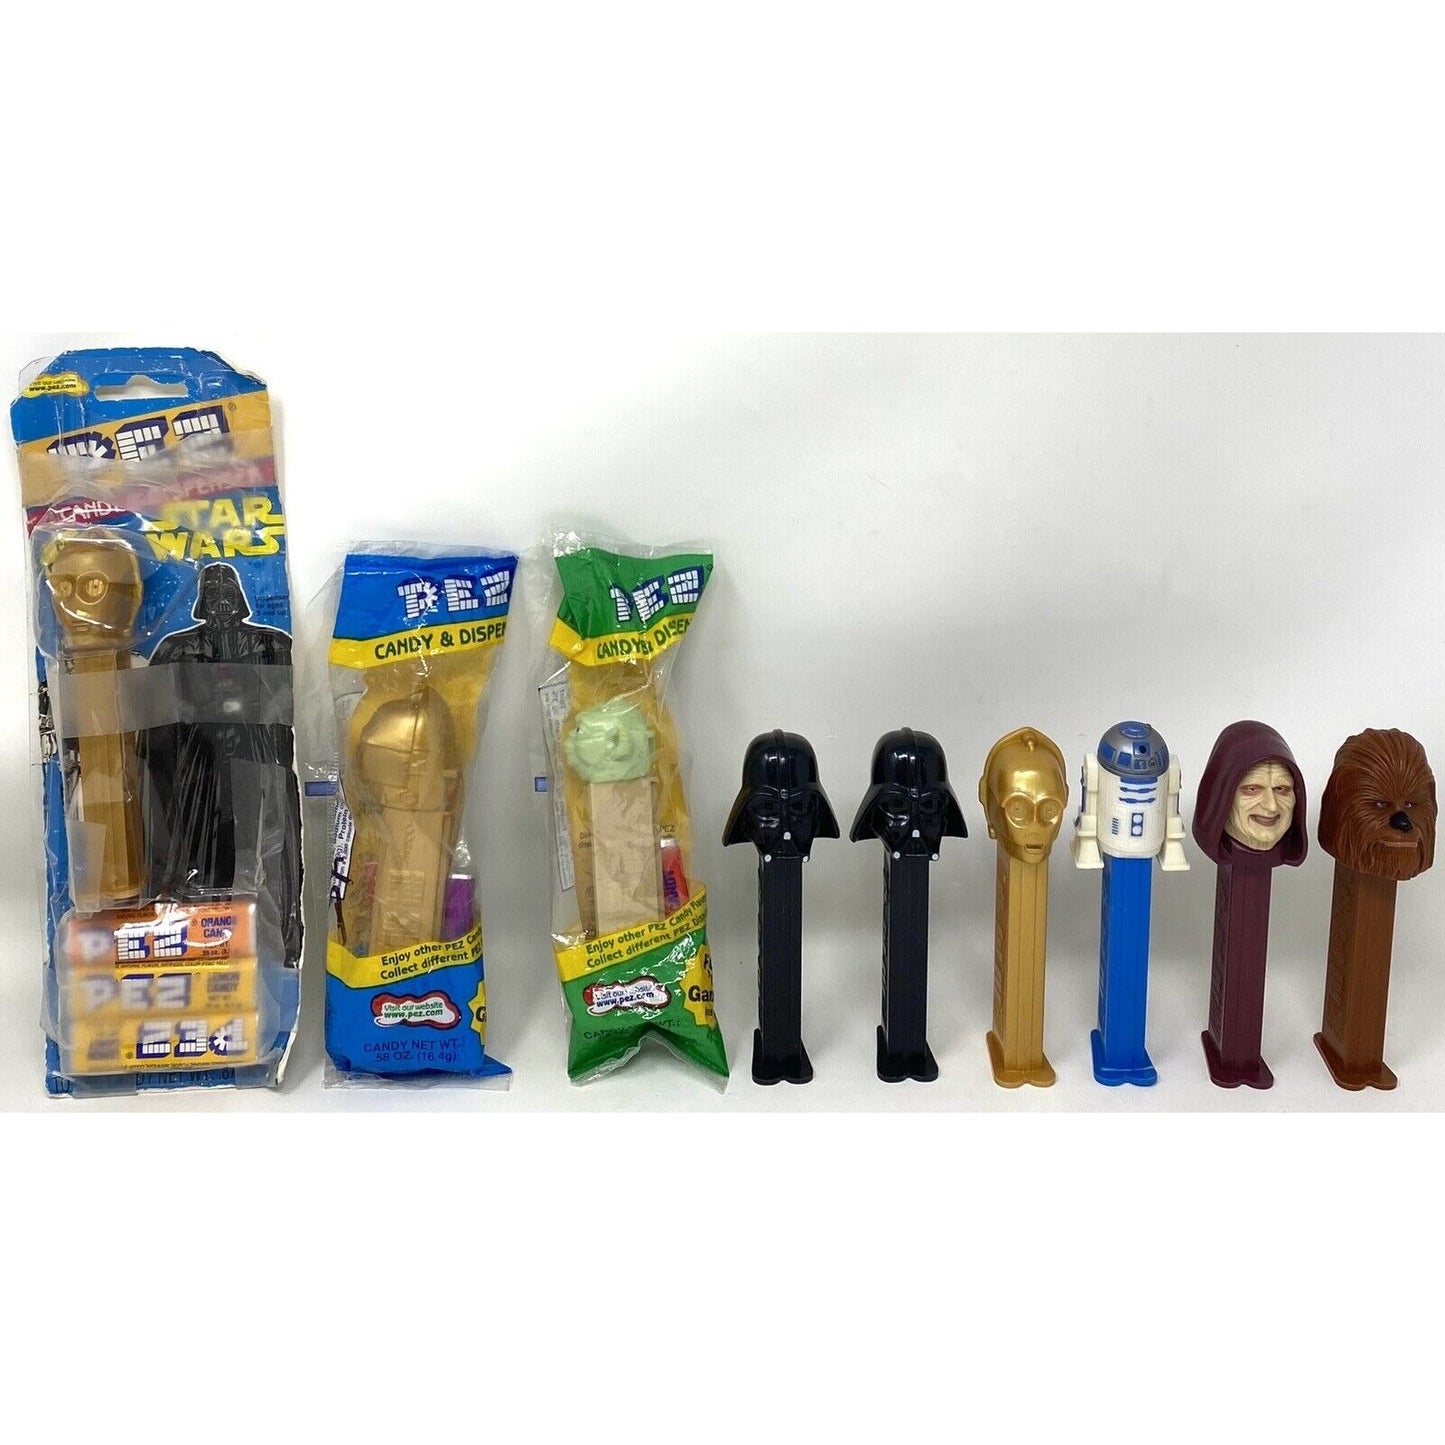 Lot of 9 Star Wars PEZ Candy Dispensers - Darth Vader C3PO Yoda R2D2 Chewbacca